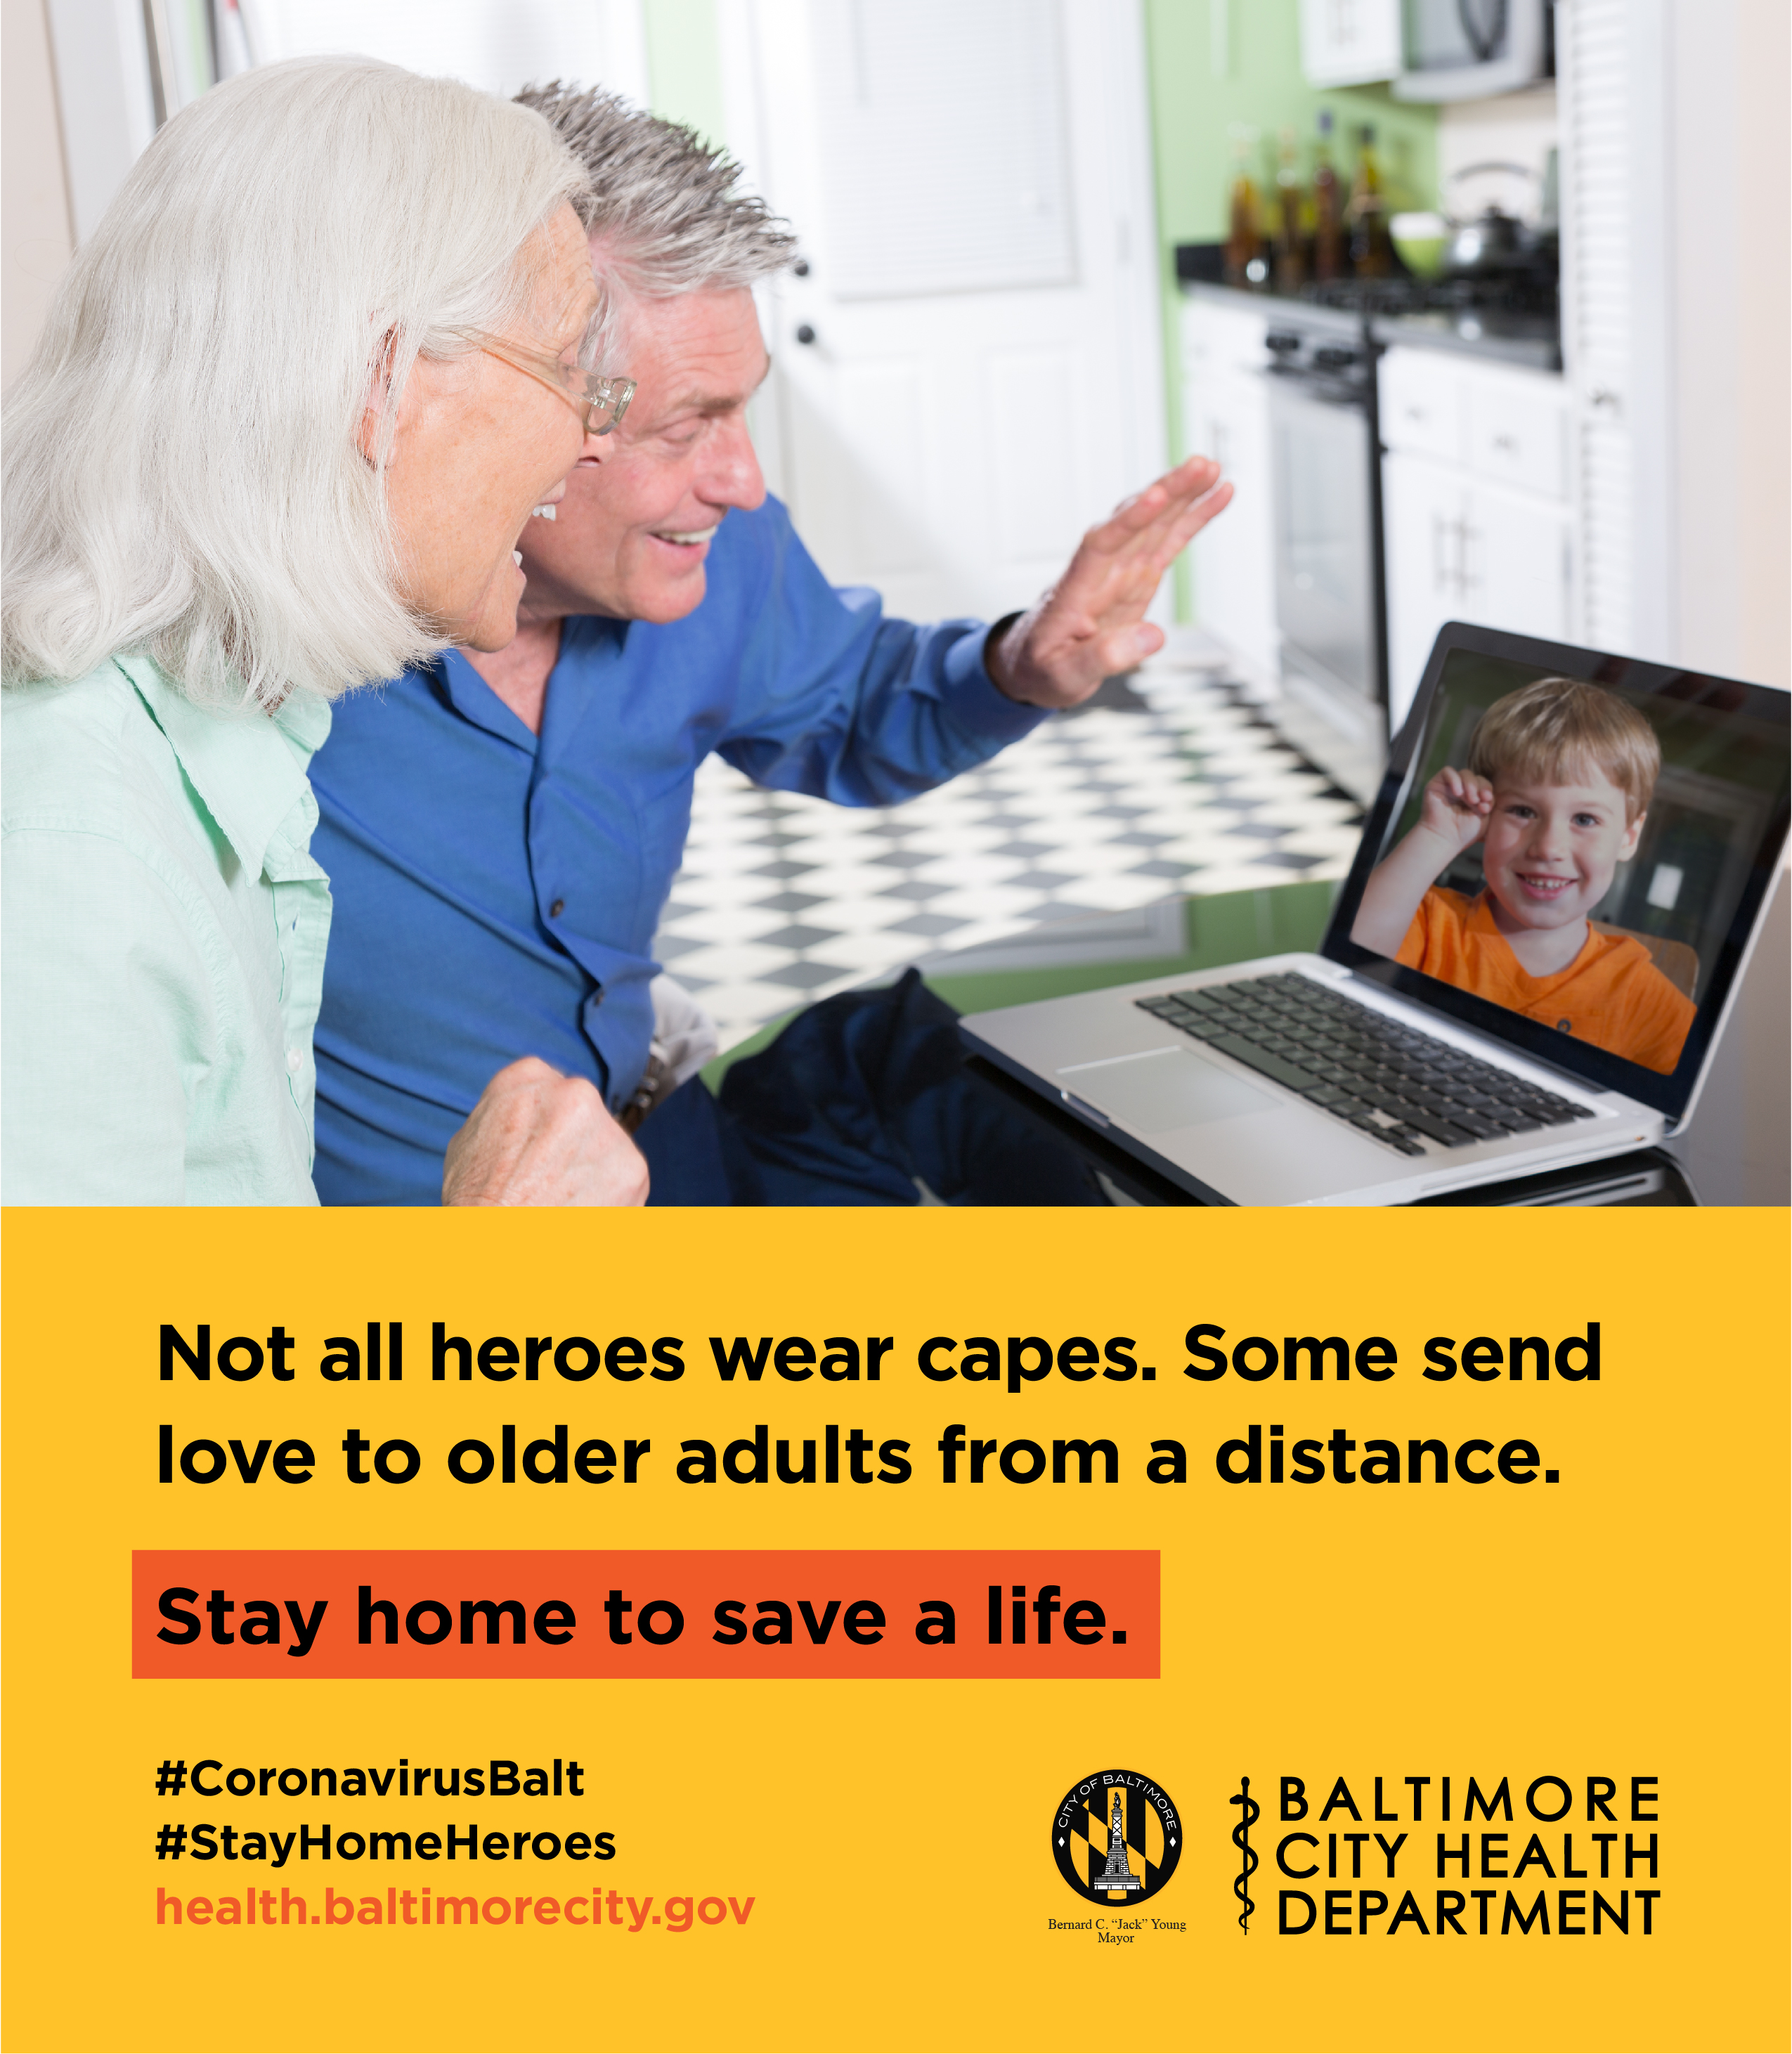 Not all heroes wear capes. Some send love to older adults from a distance. Stay home to save a life.